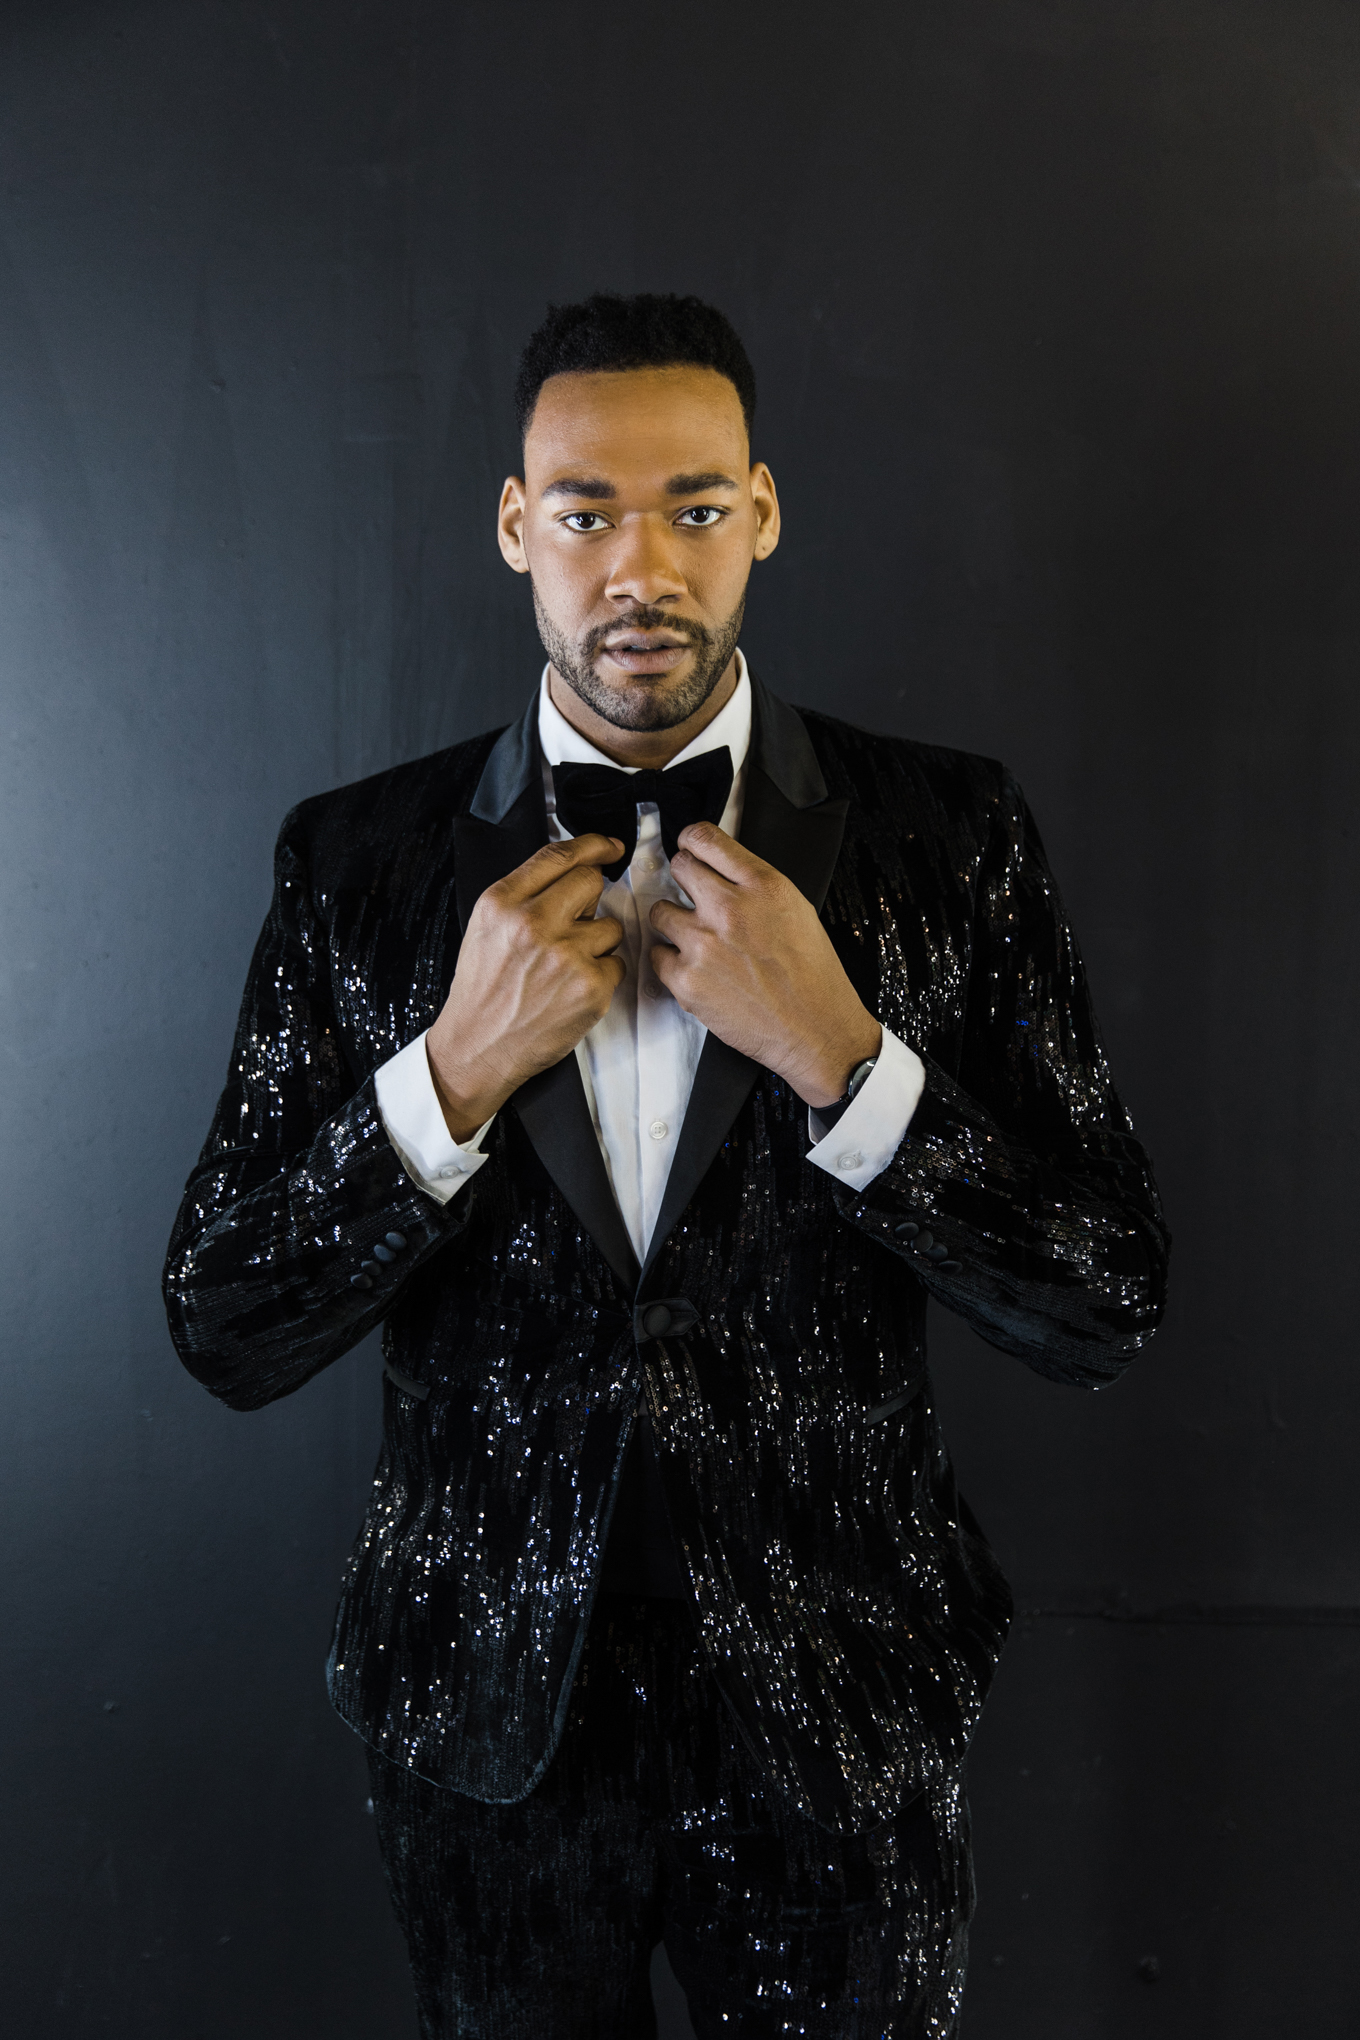 Dallas Fashion Photography; photo of an African American man wearing a sequin tuxedo, adjusting his bow tie, and staring intently at the camera in front of a black background